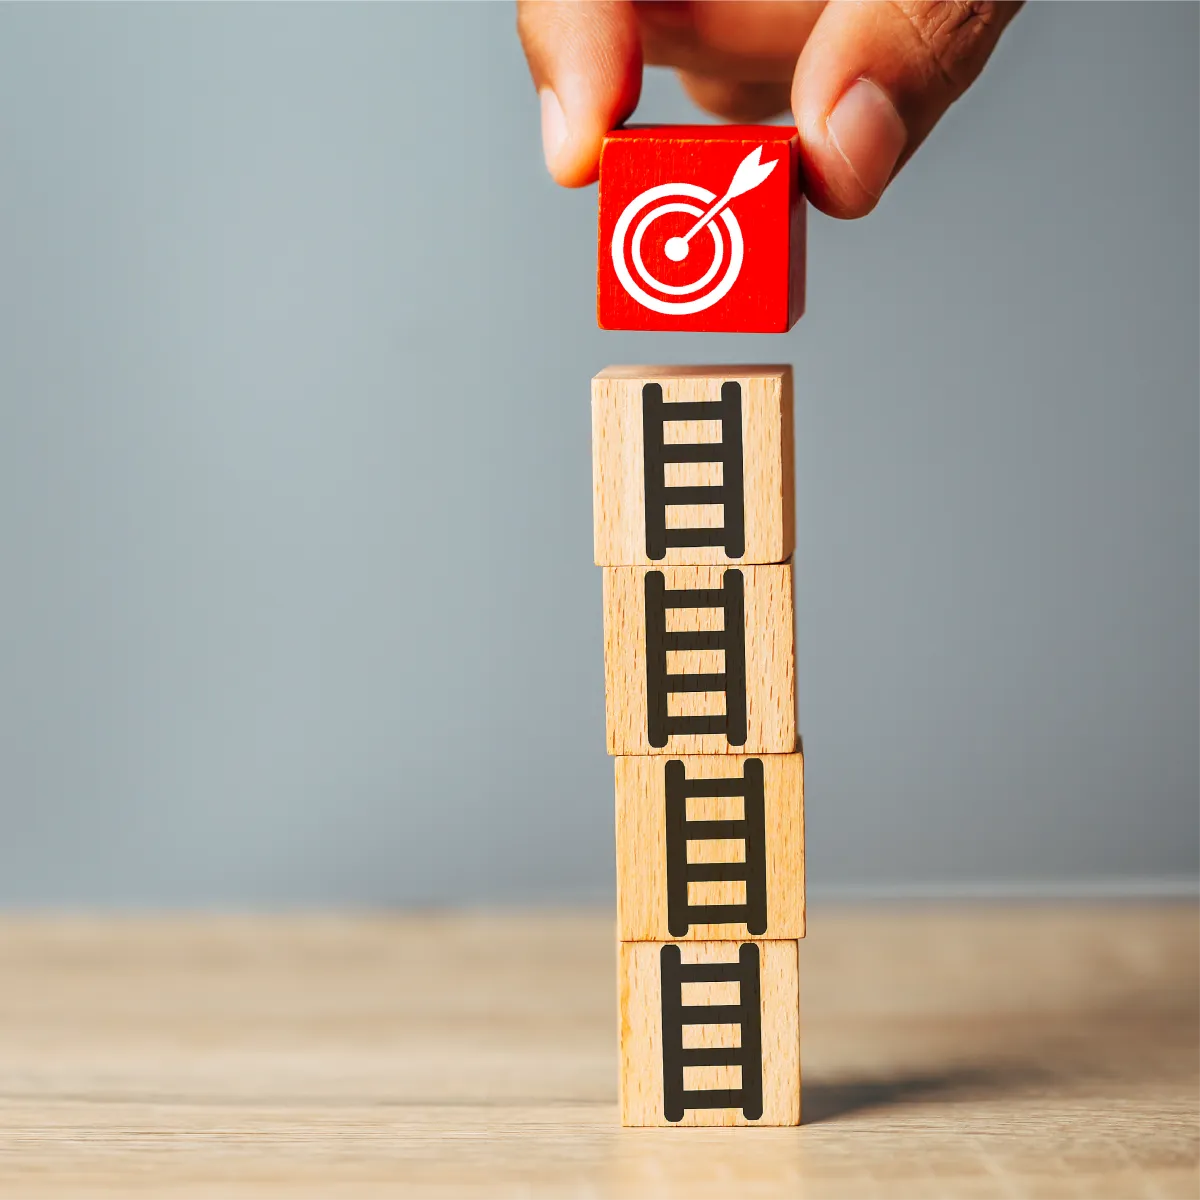 A hand places a red block with a target and arrow icon on top of a stack of wooden blocks with ladder icons, symbolizing the steps to achieving goals.